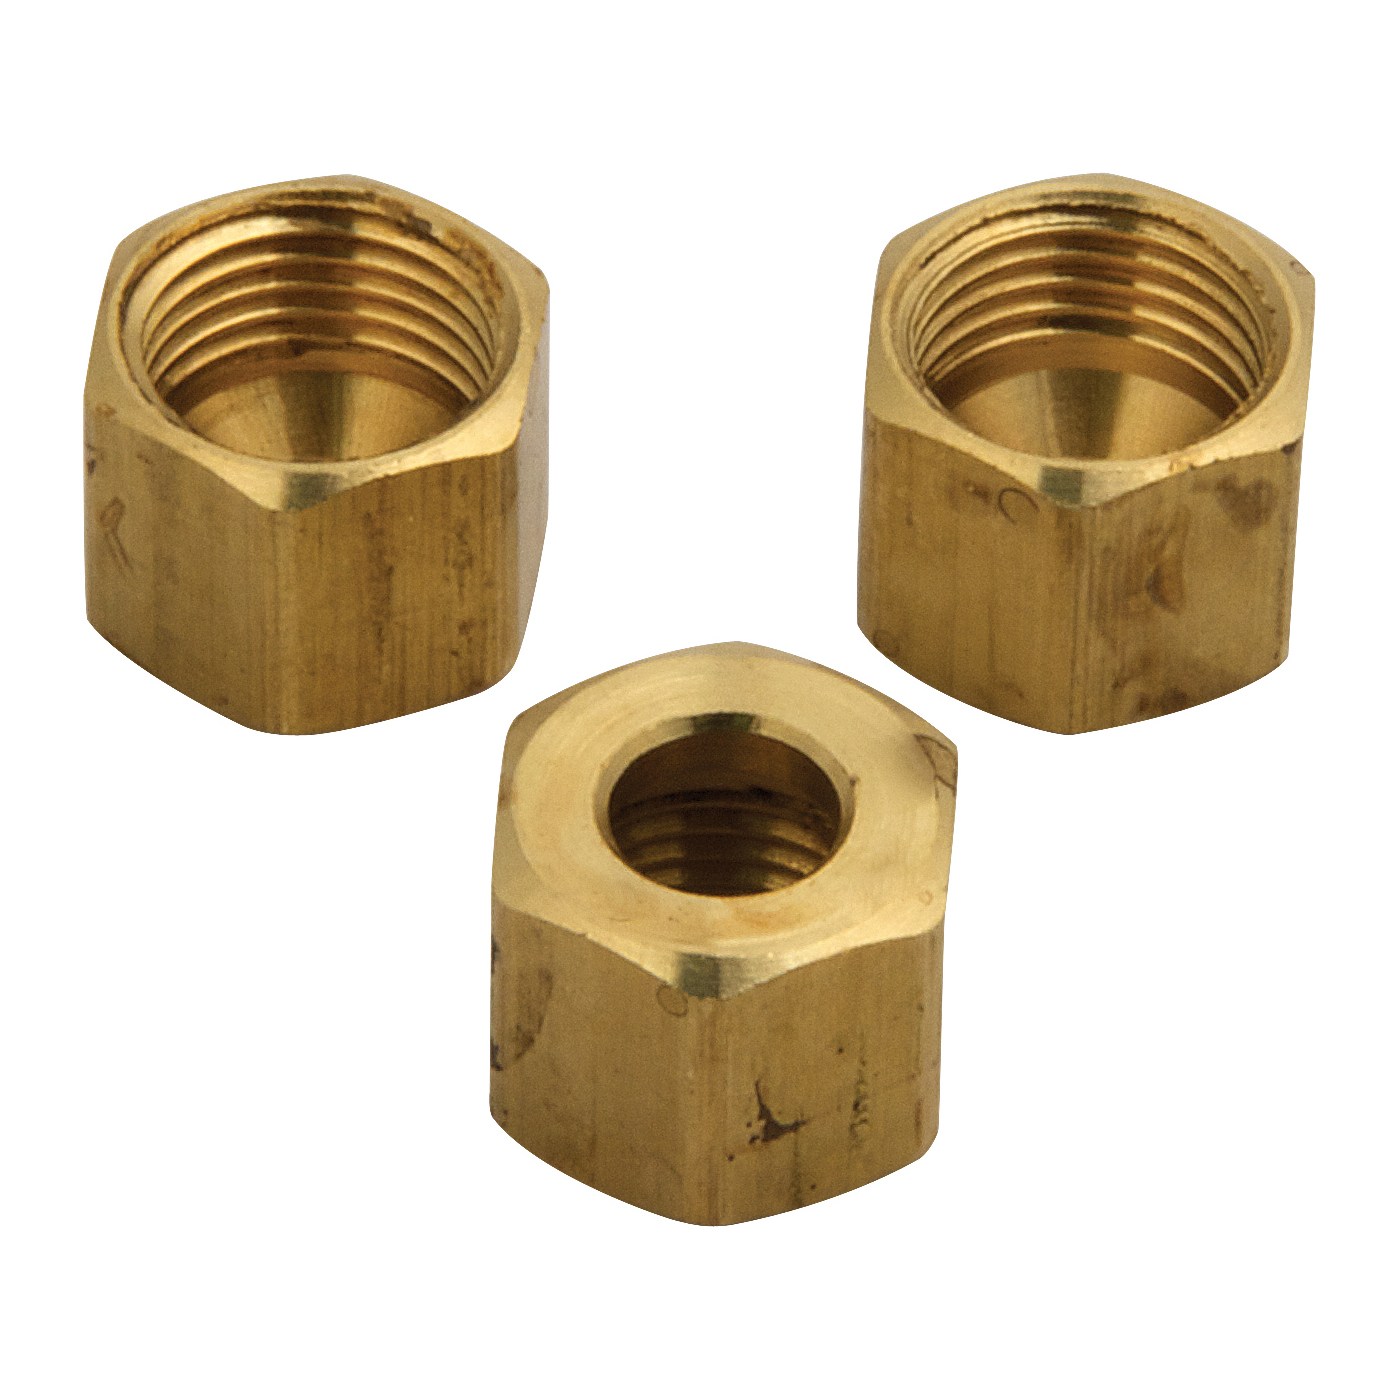 Compression fitting - Union - Master Plumber®